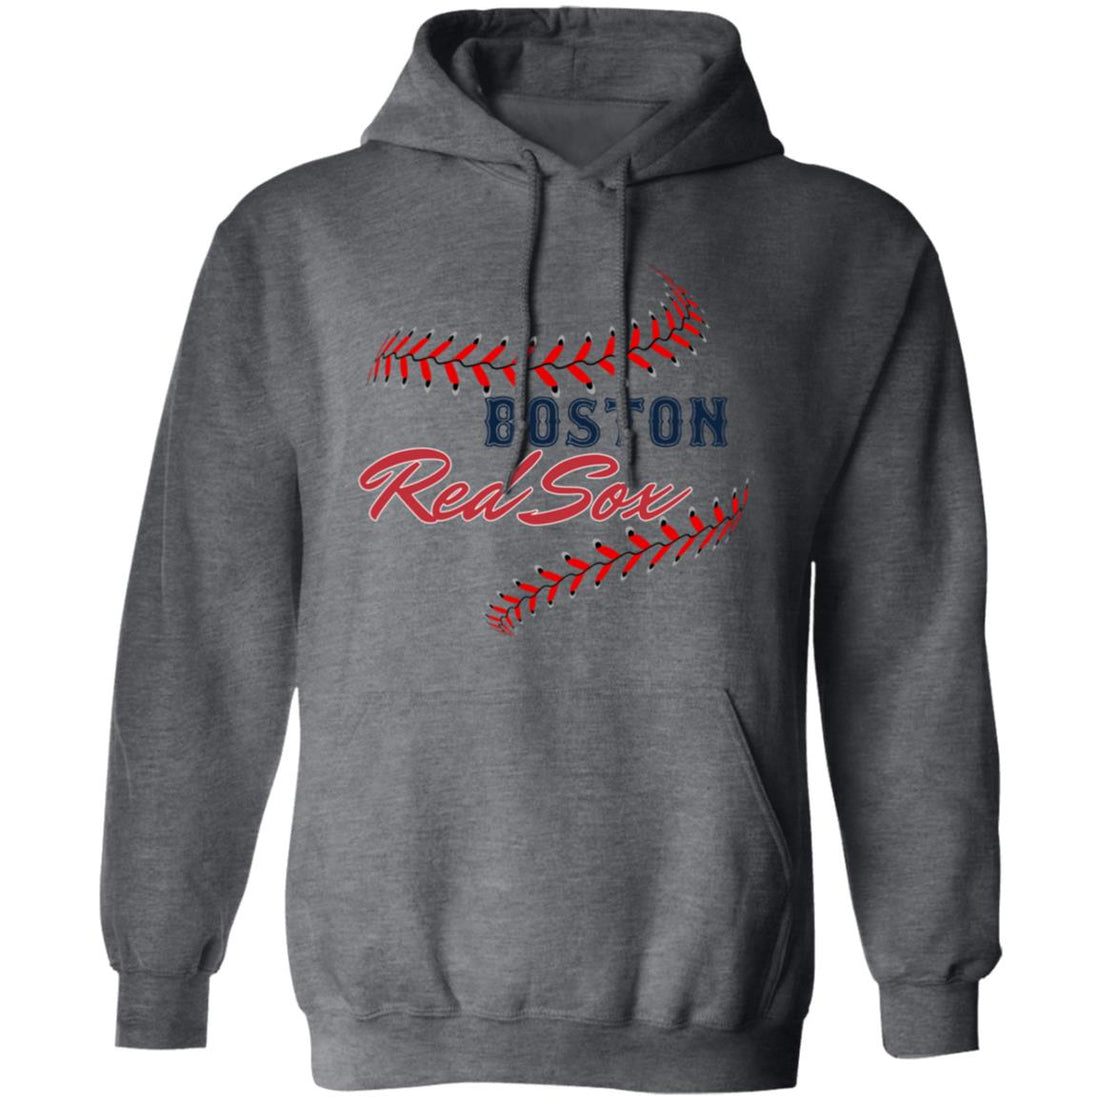 Red Sox Stitches Hoodie - Sweatshirts - Positively Sassy - Red Sox Stitches Hoodie